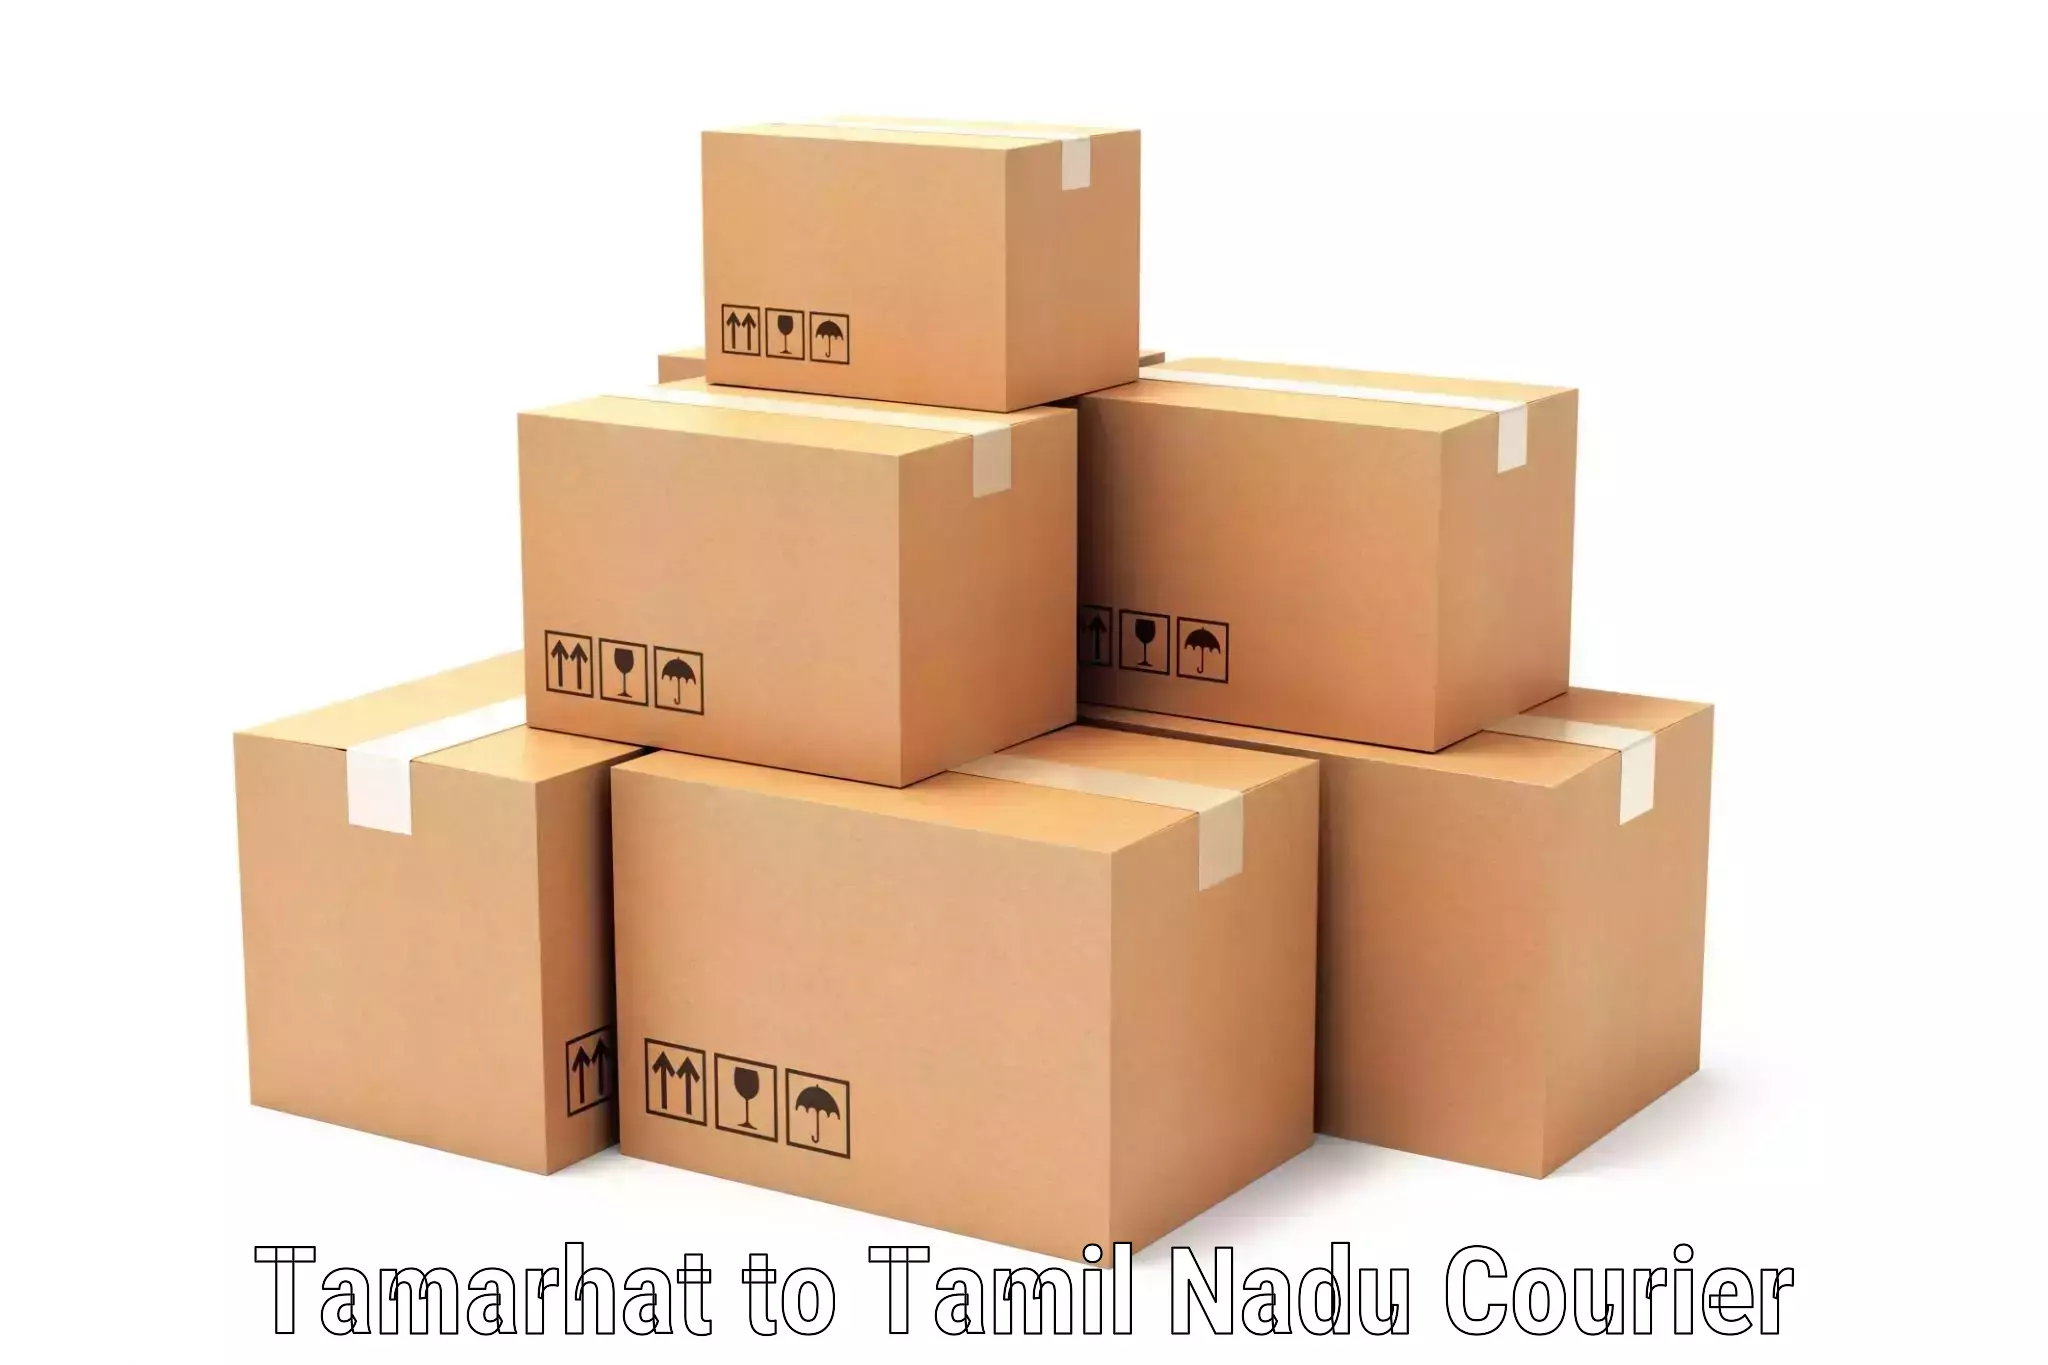 Quality courier services in Tamarhat to Shanmugha Arts Science Technology and Research Academy Thanjavur